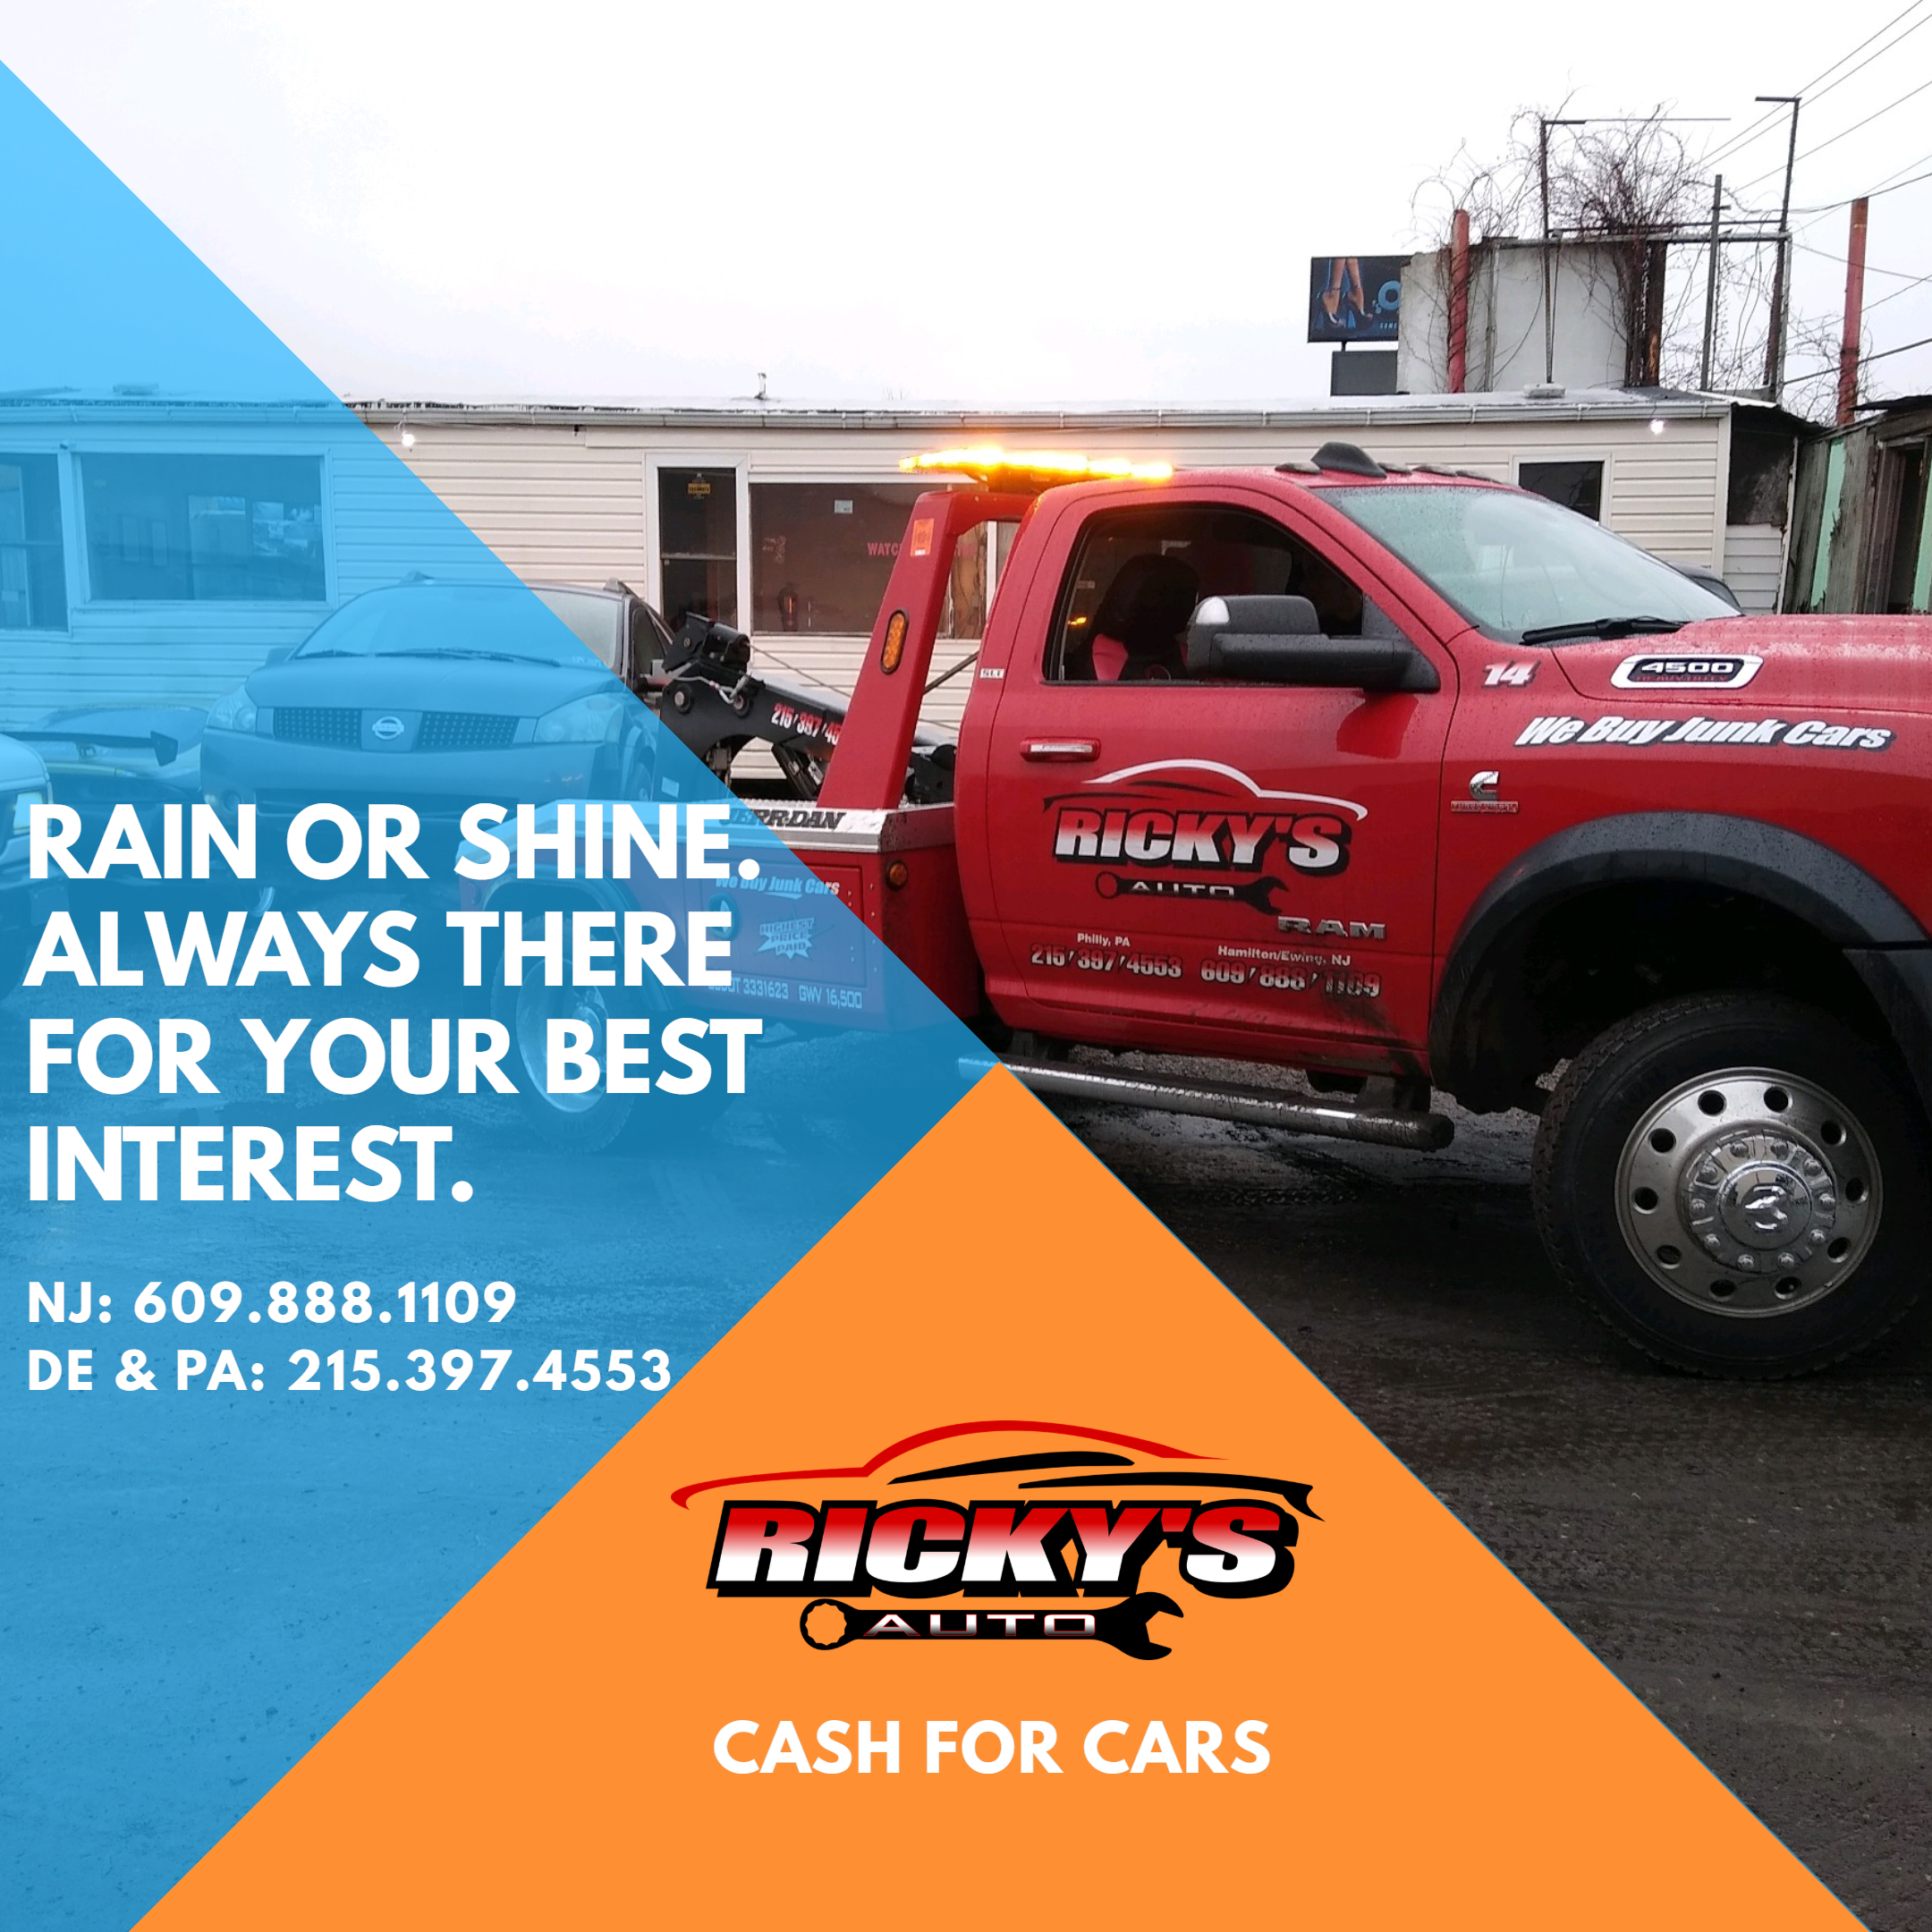 Ricky's Auto - Cash for Cars Photo